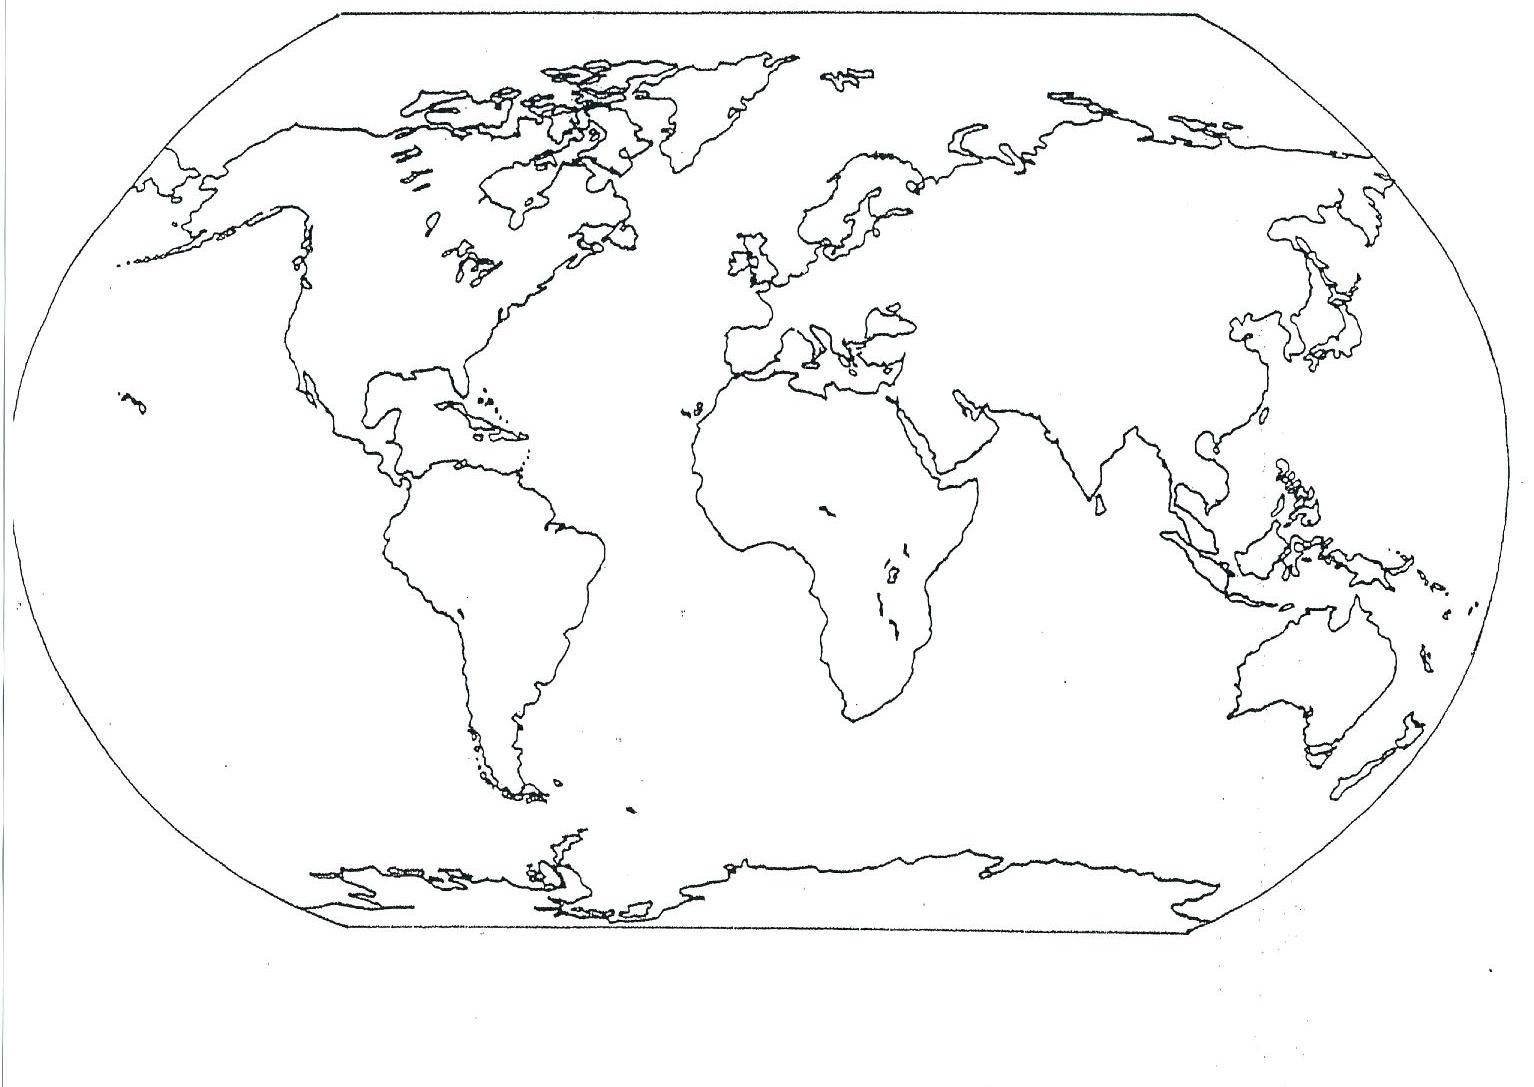 7 Continents World Map